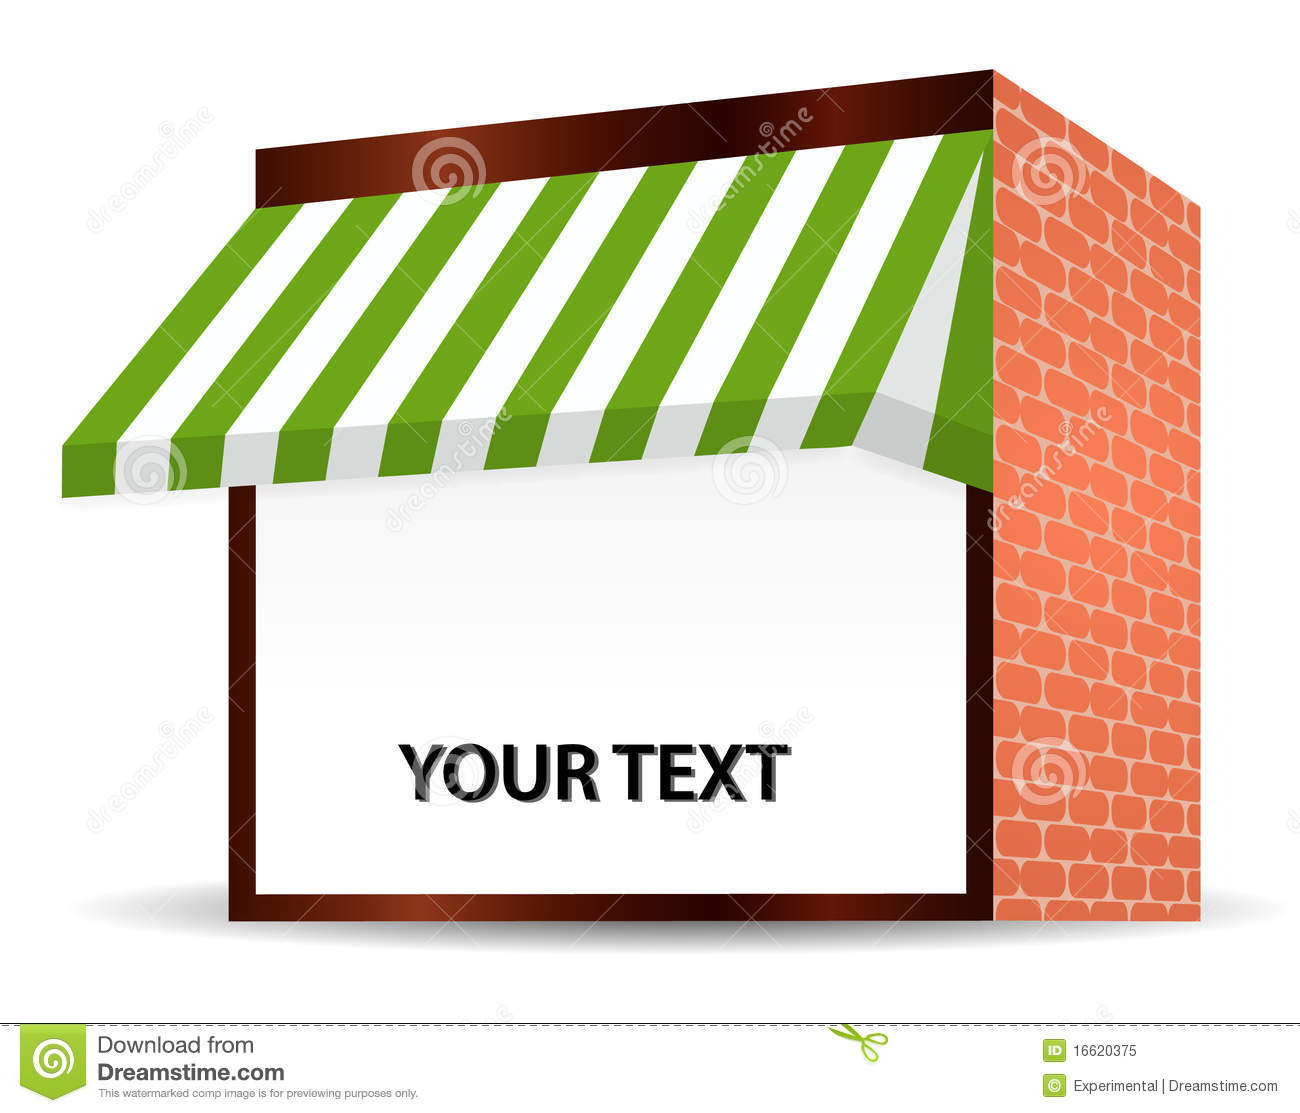 Storefront Clipart Storefront Awning Green 16620375 Jpg